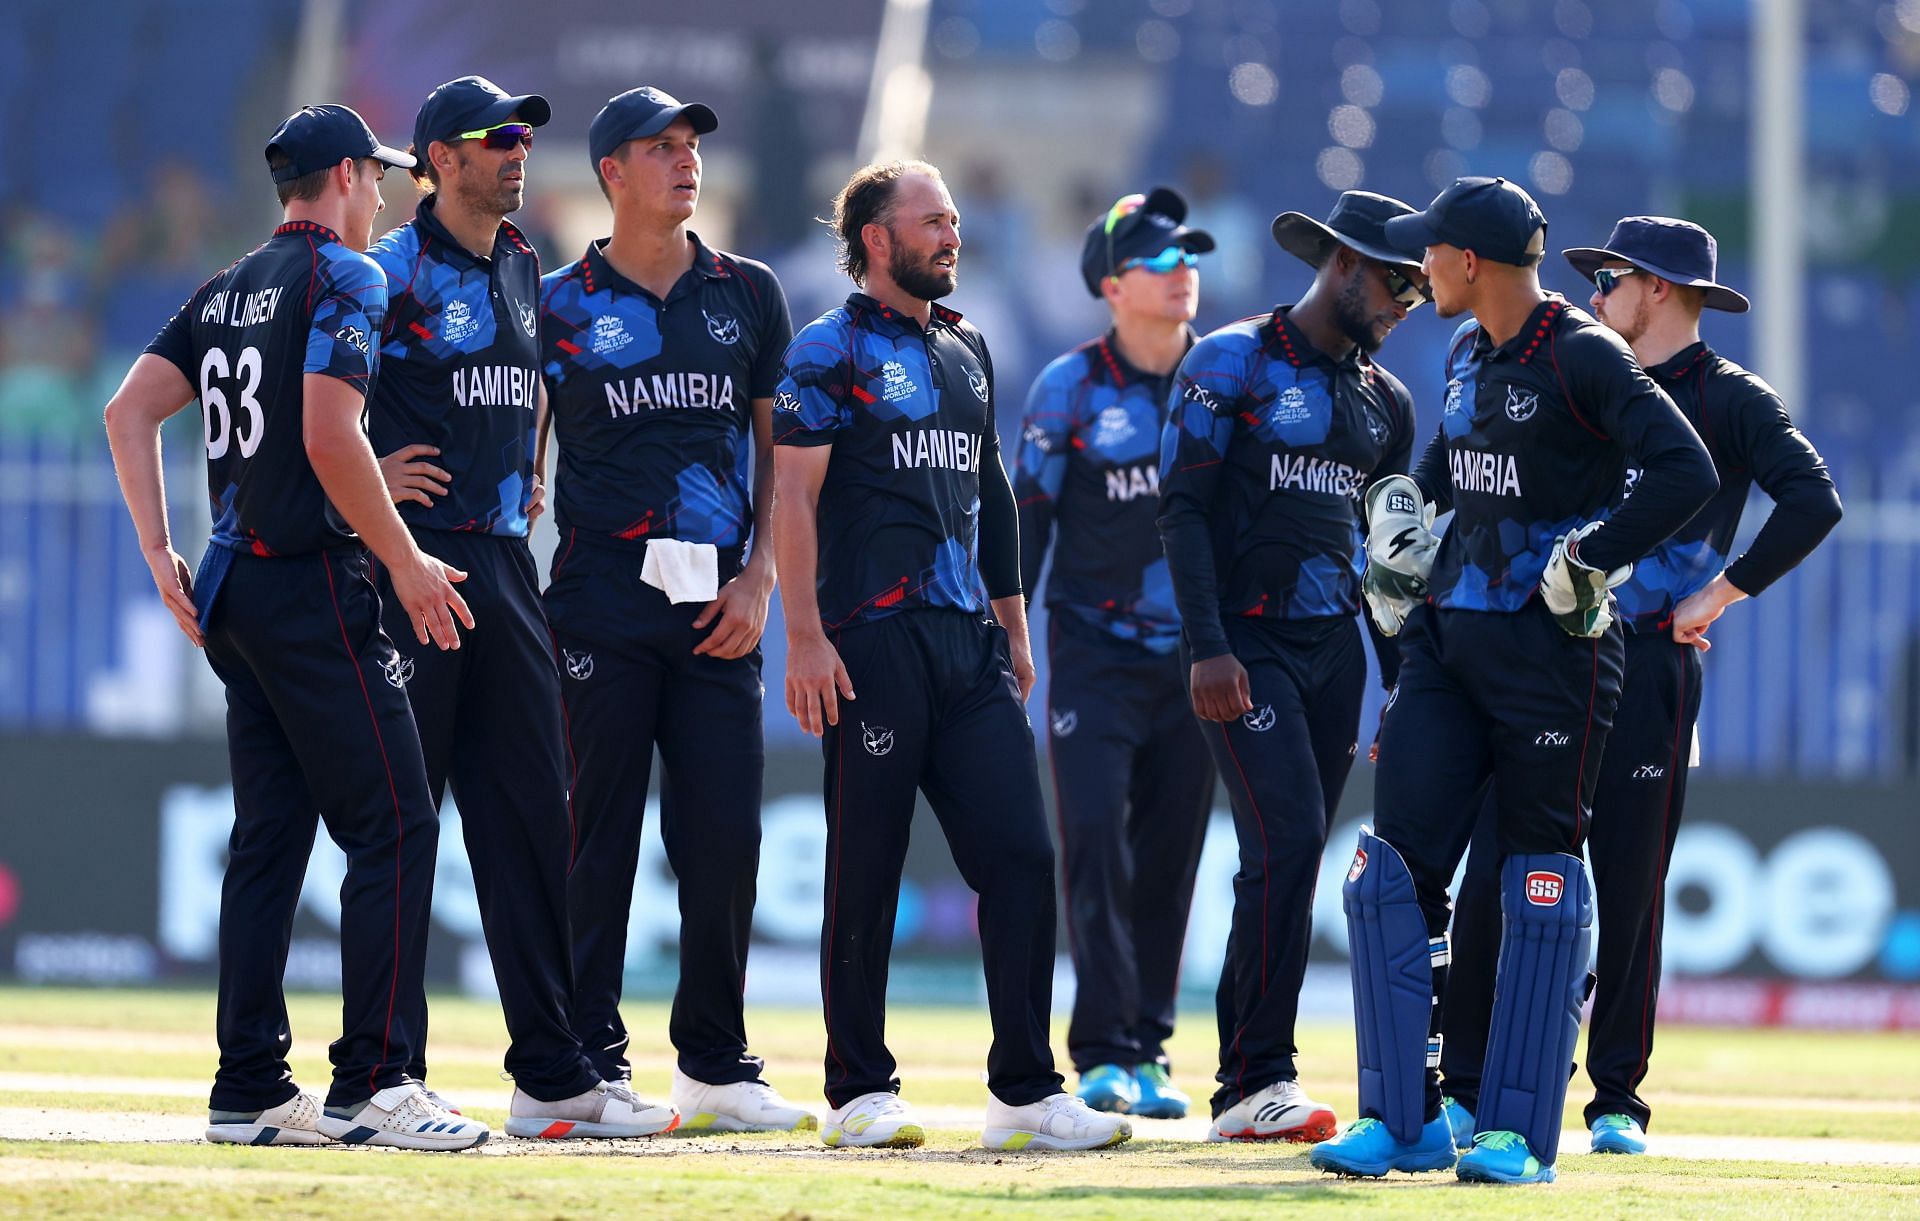 Namibia will play their third straight T20 World Cup.